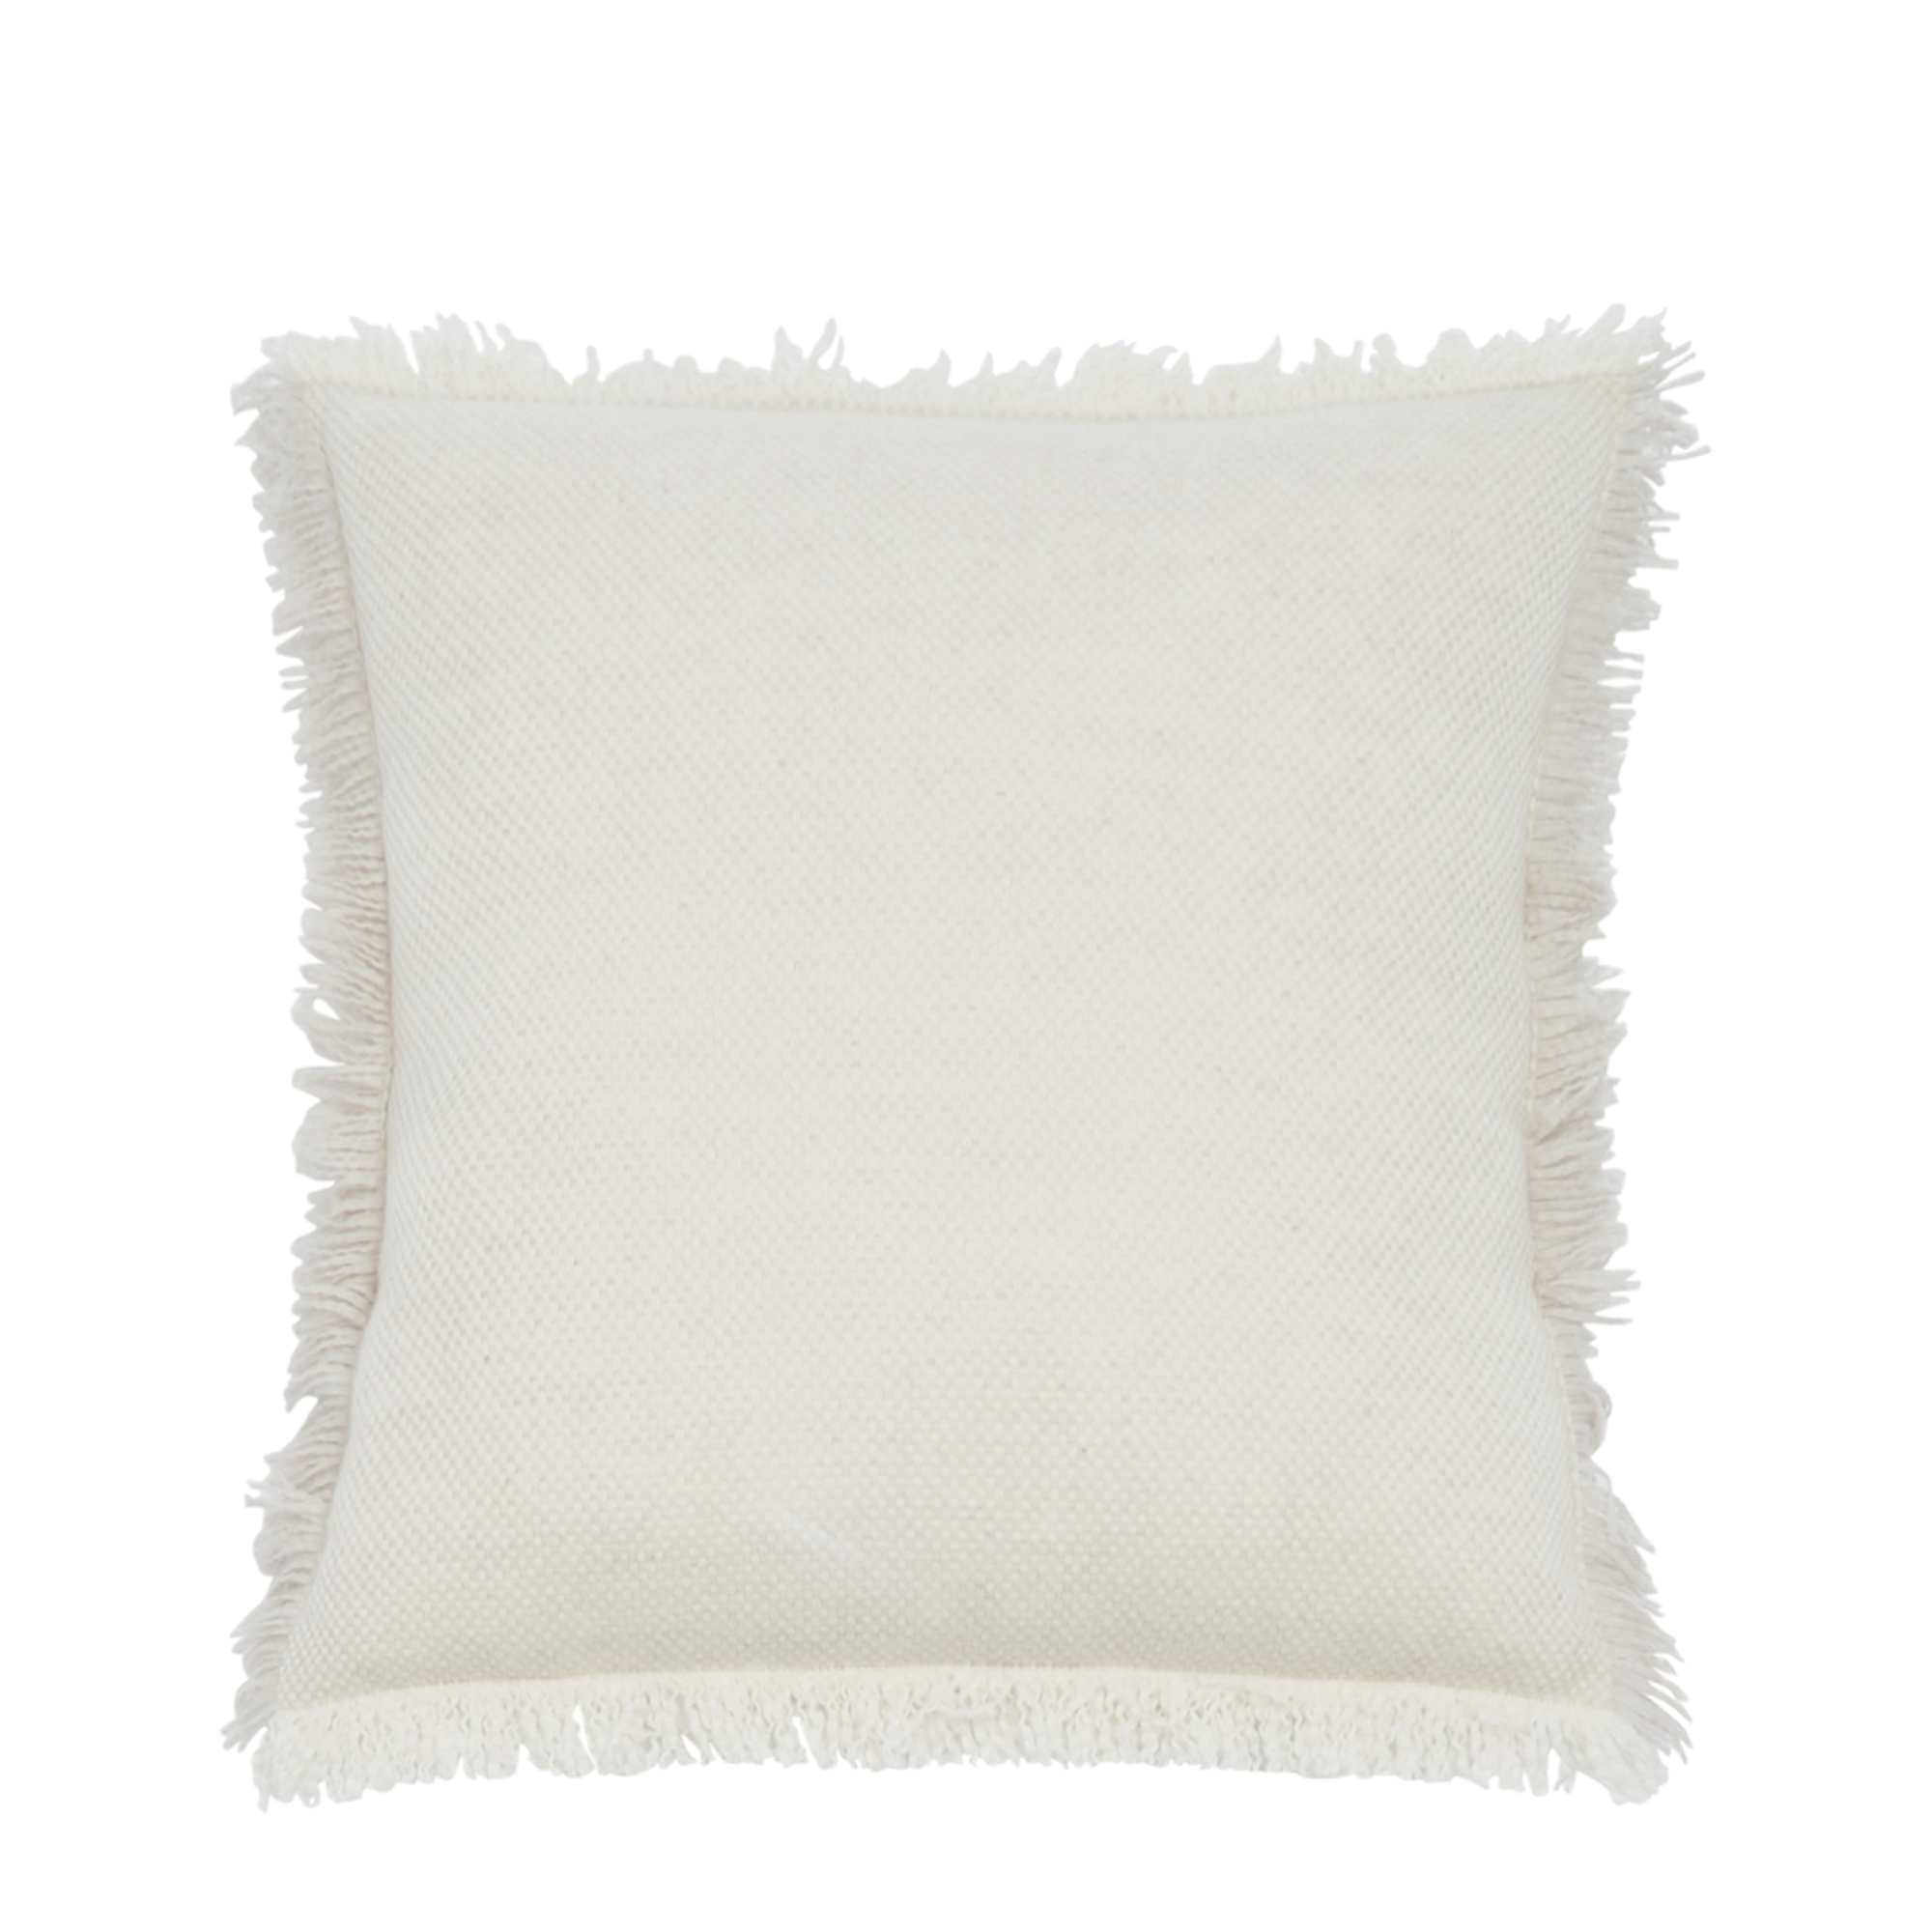 Ivory cashmere cushion with a knitted effect and hand-fringed hem, offering a luxurious and textured accent for any space.